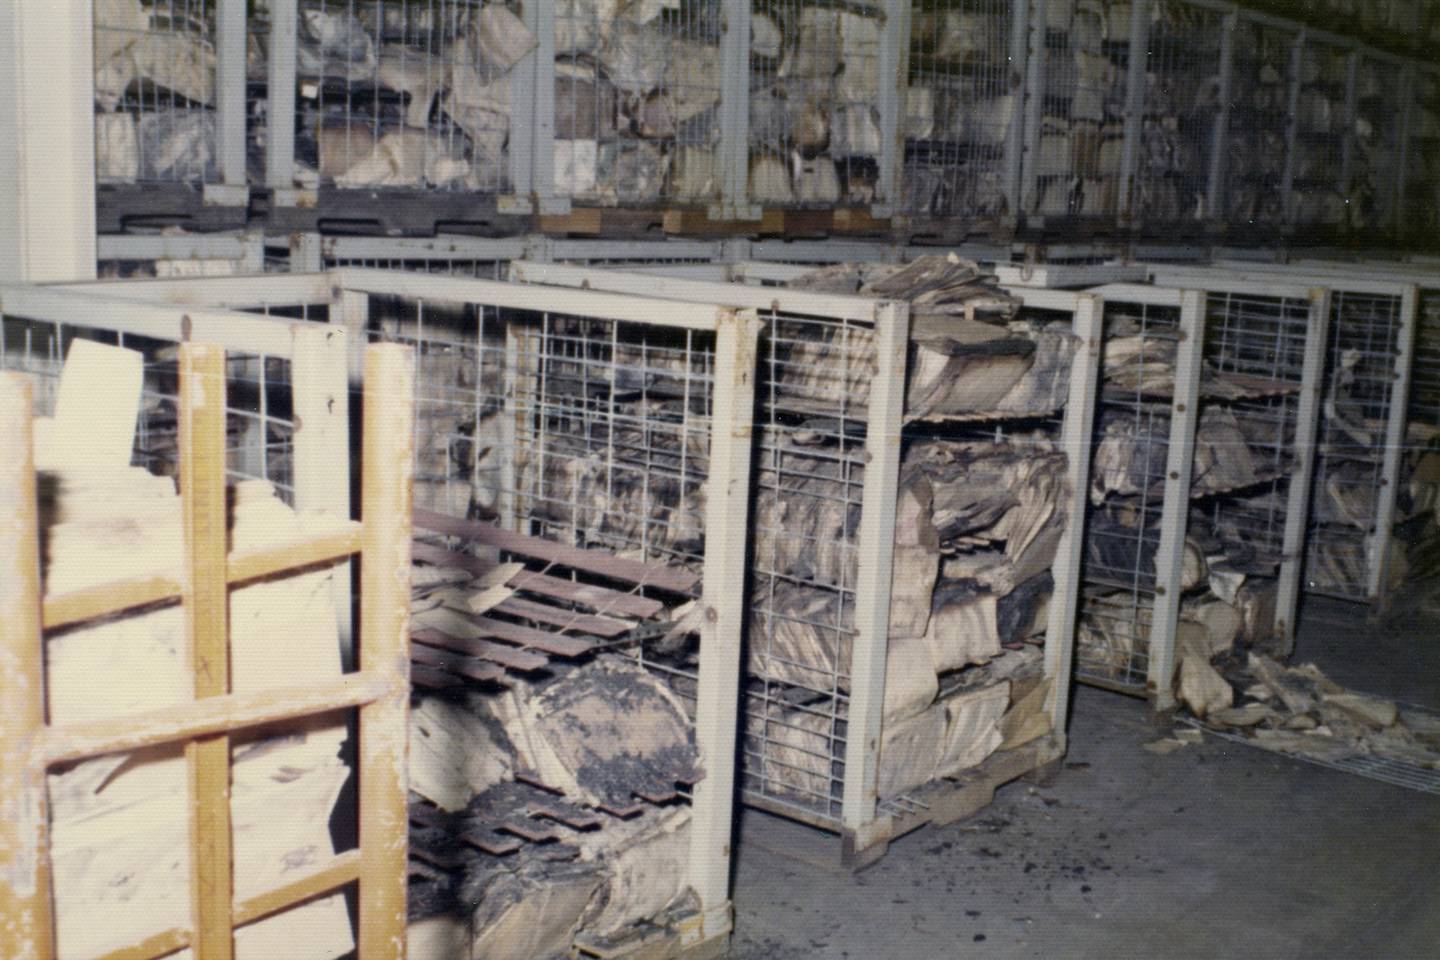 This photo provided by the National Archives and Records Administration shows damaged records after a massive fire at the Military Personnel Records Center in Overland, Mo., near St. Louis, which started on July 12, 1973.